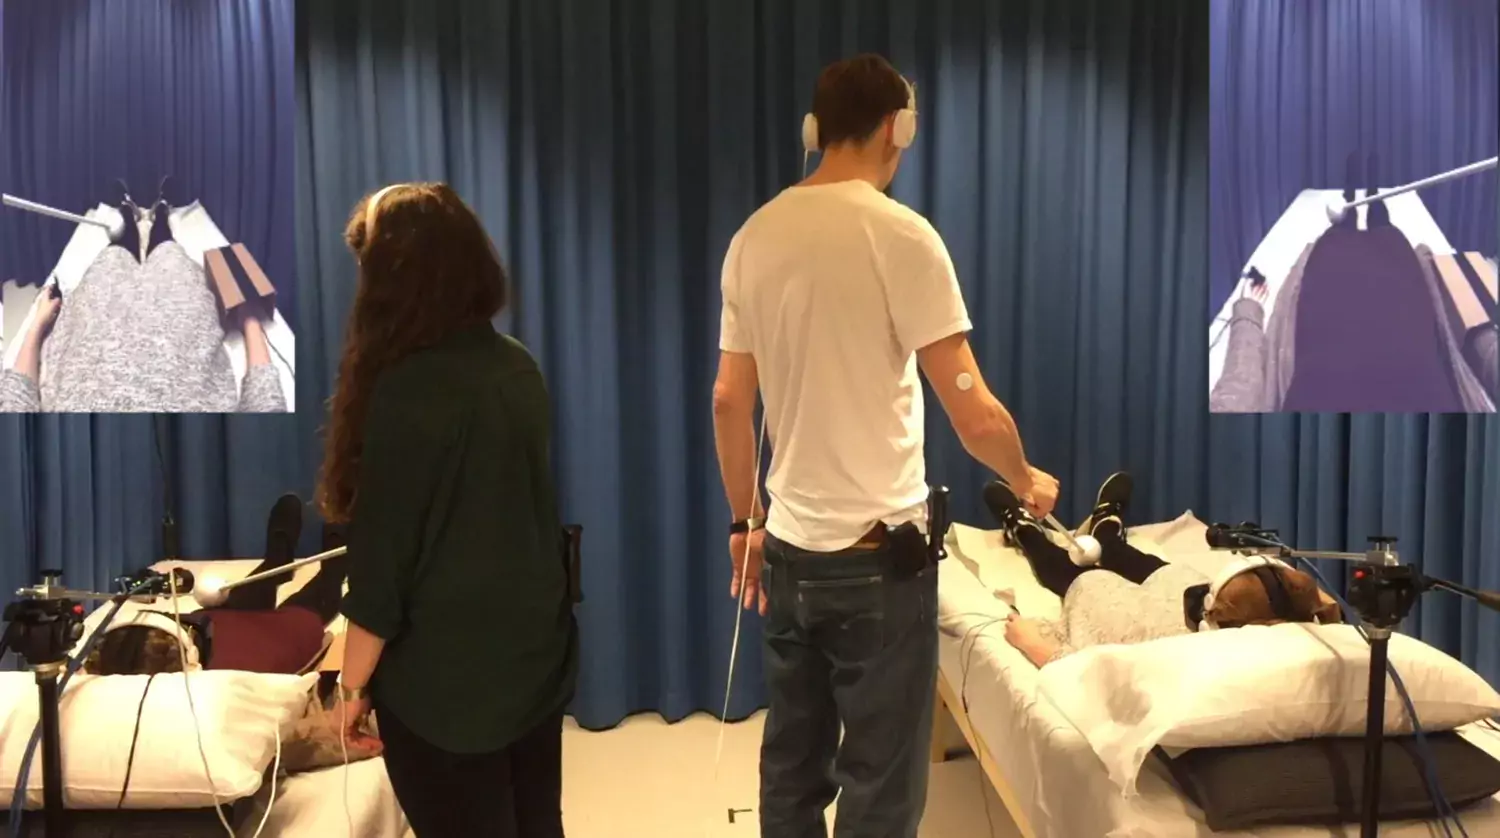 Set-up of perceptual illusion experiment with two persons on beds and two observers